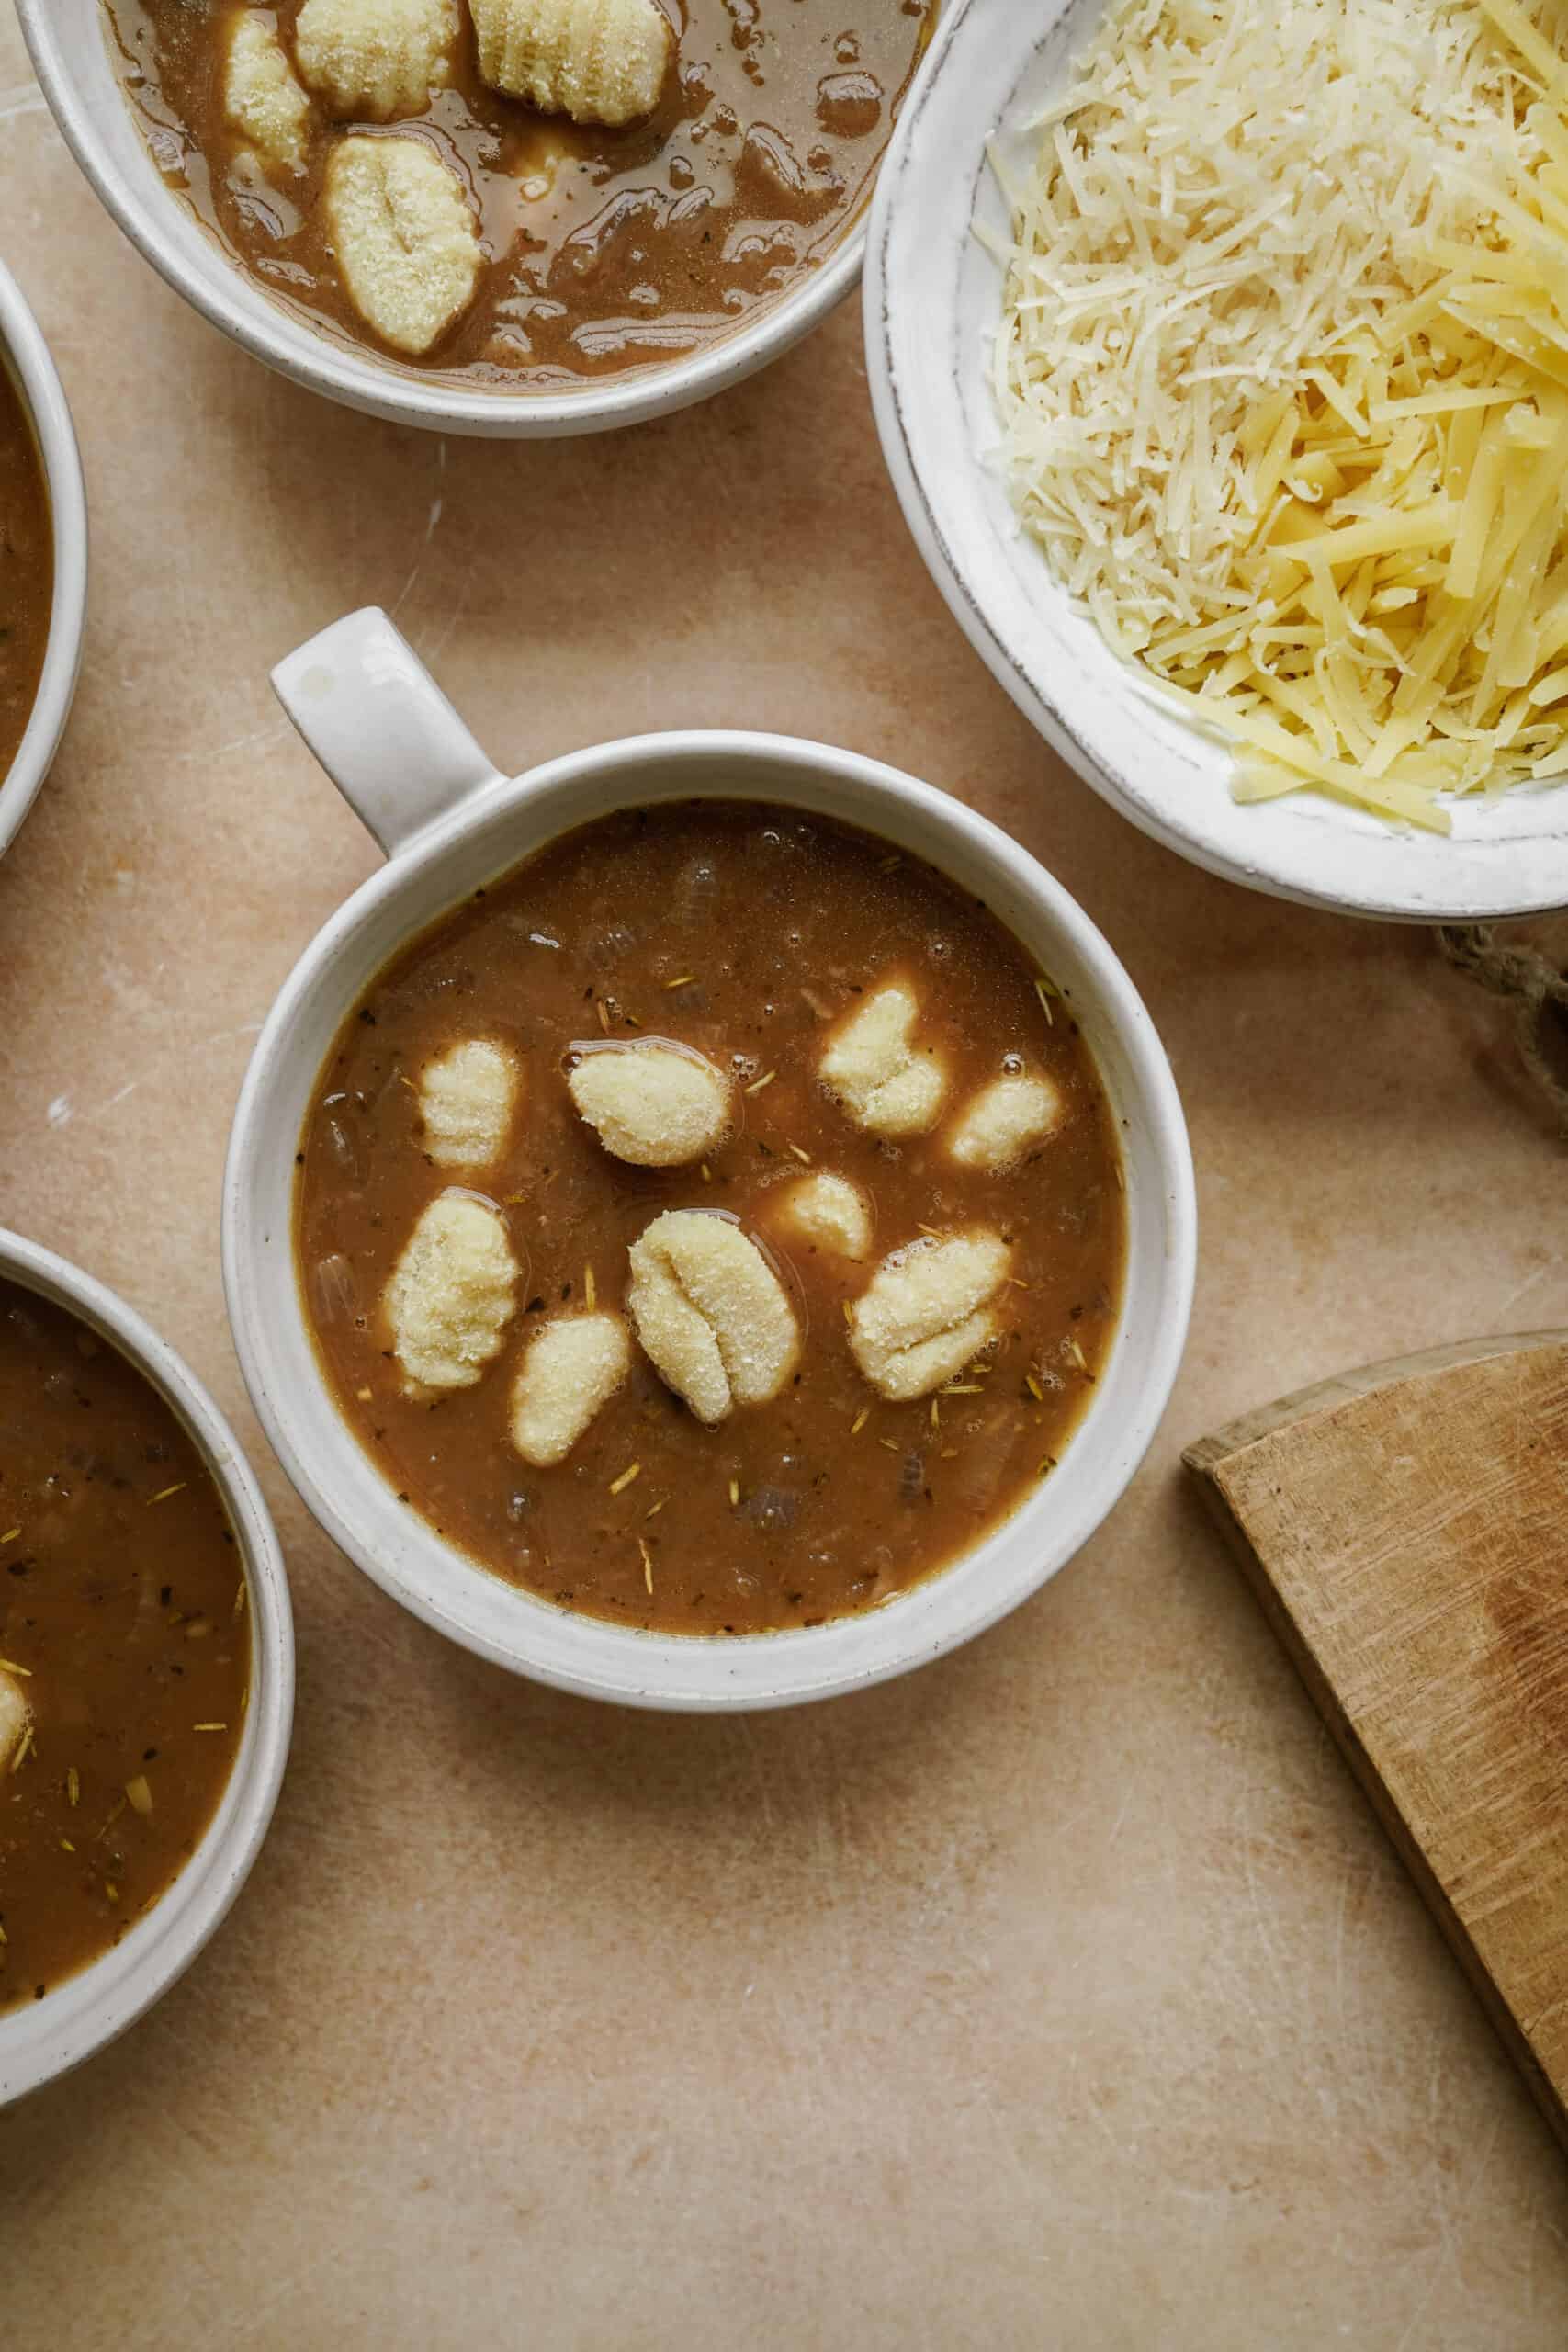 Gnocchi added to baked french onion soup